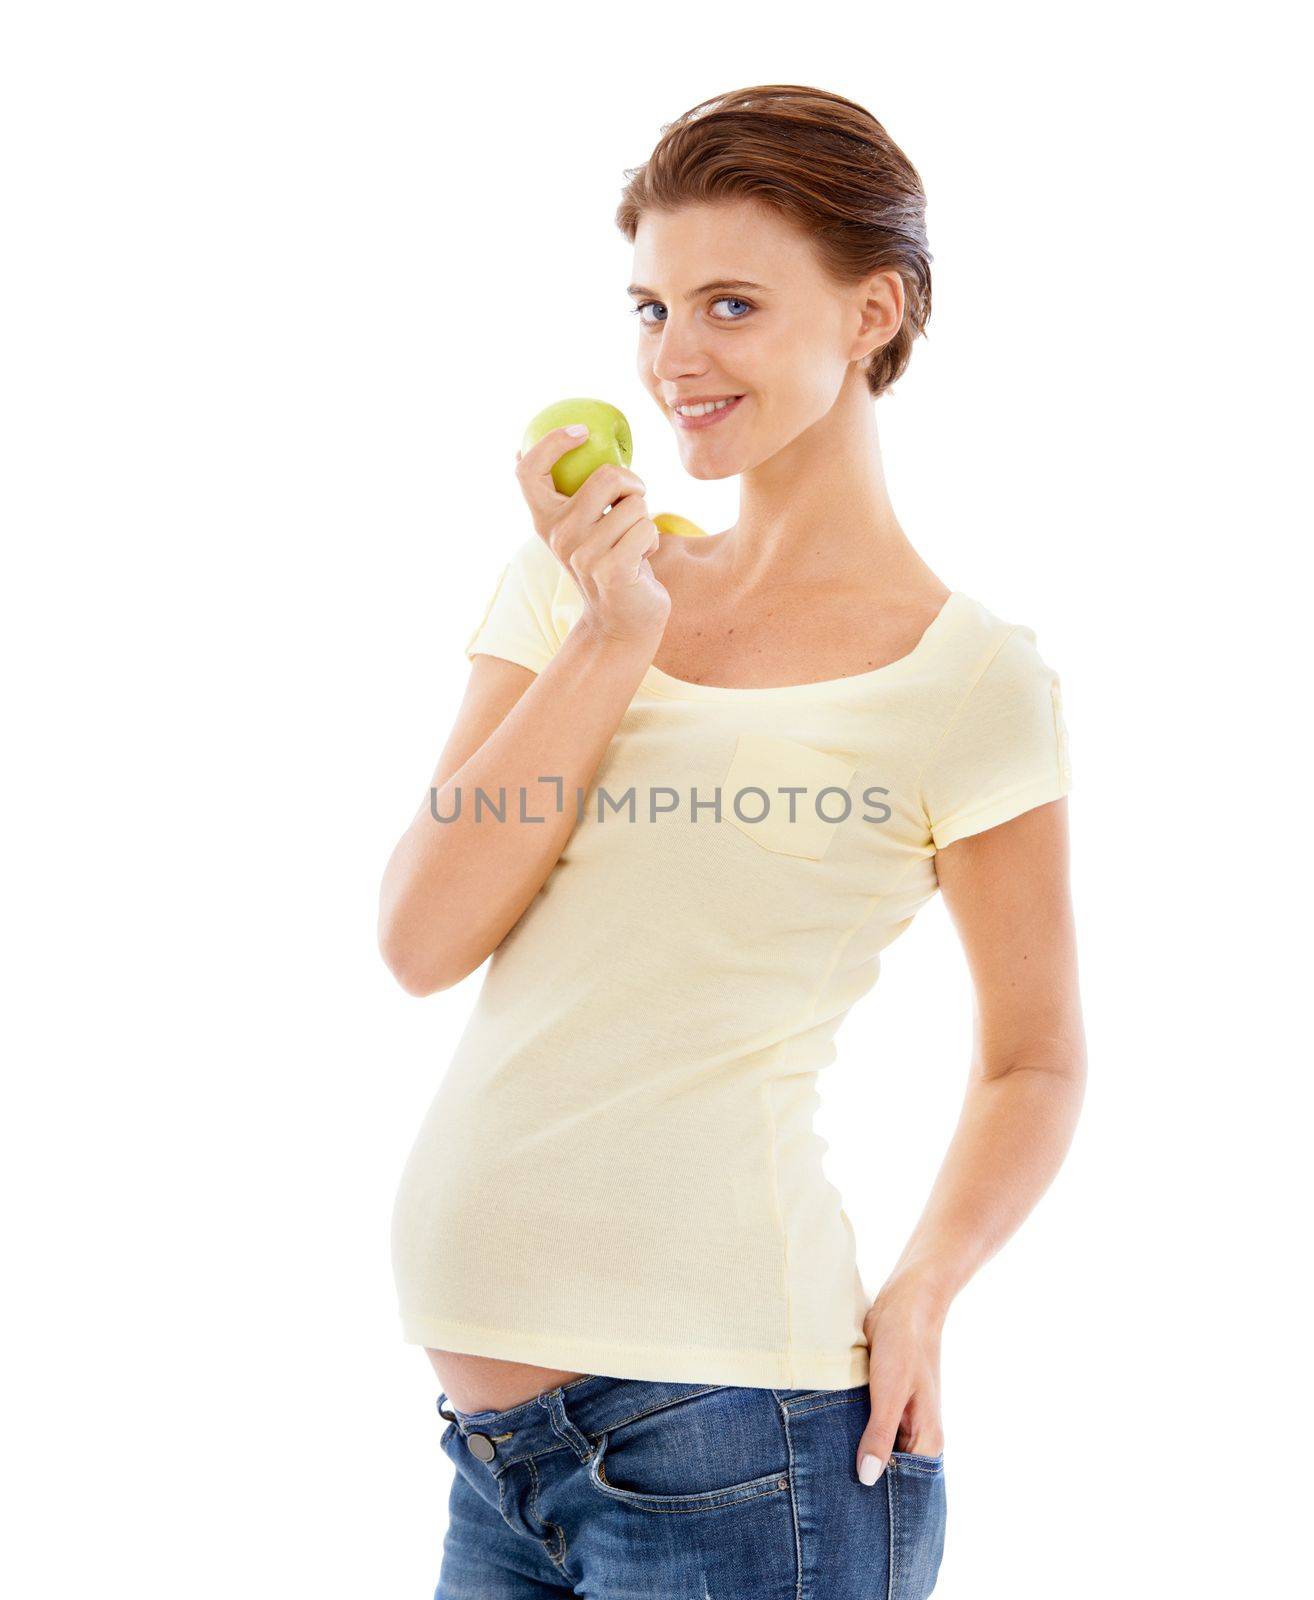 Eating for two now...A pretty pregnant woman holding a green apple while isolated on a white background